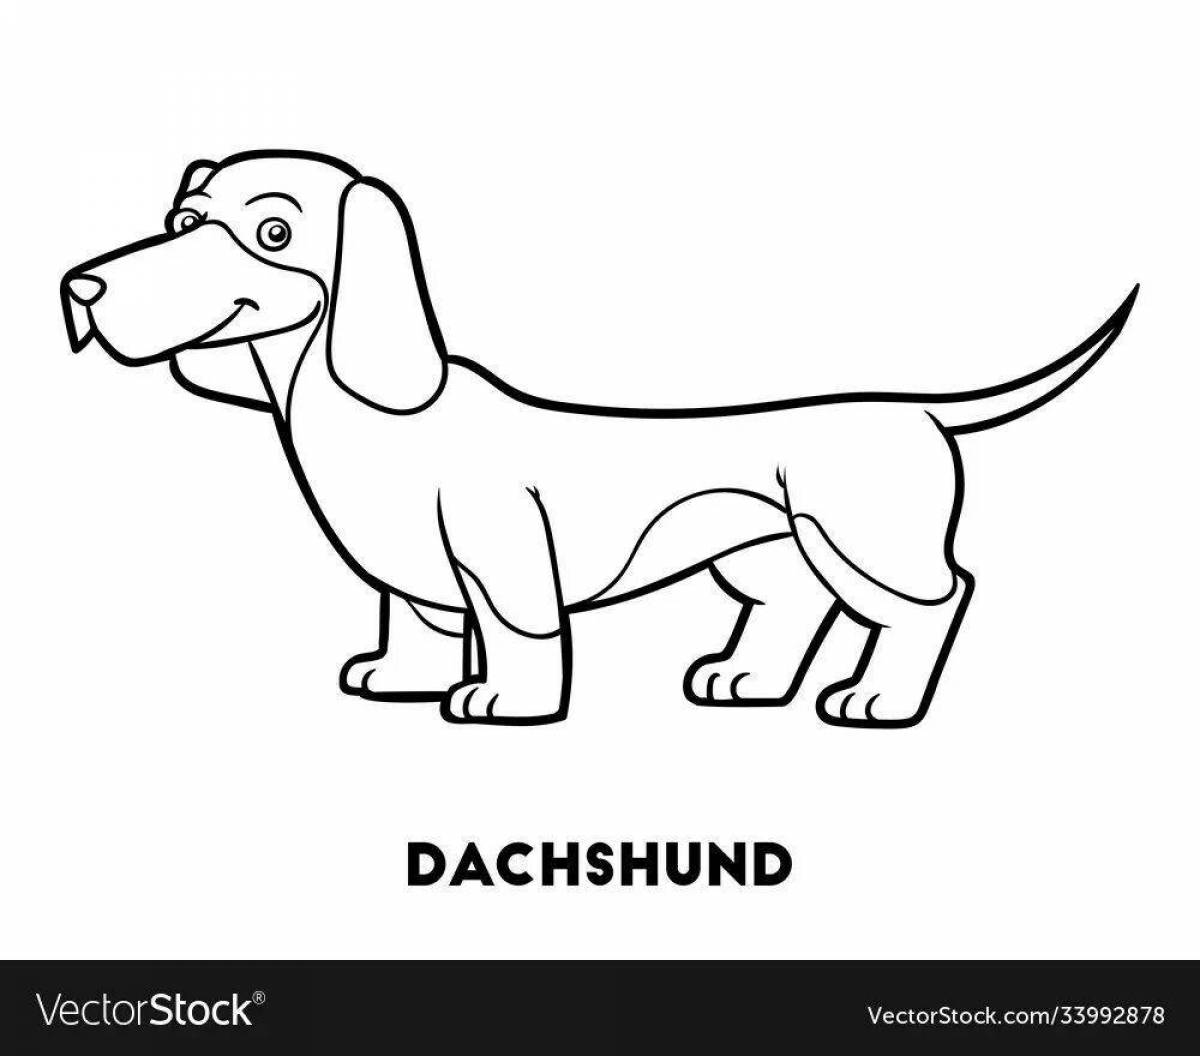 Humorous dachshund coloring book